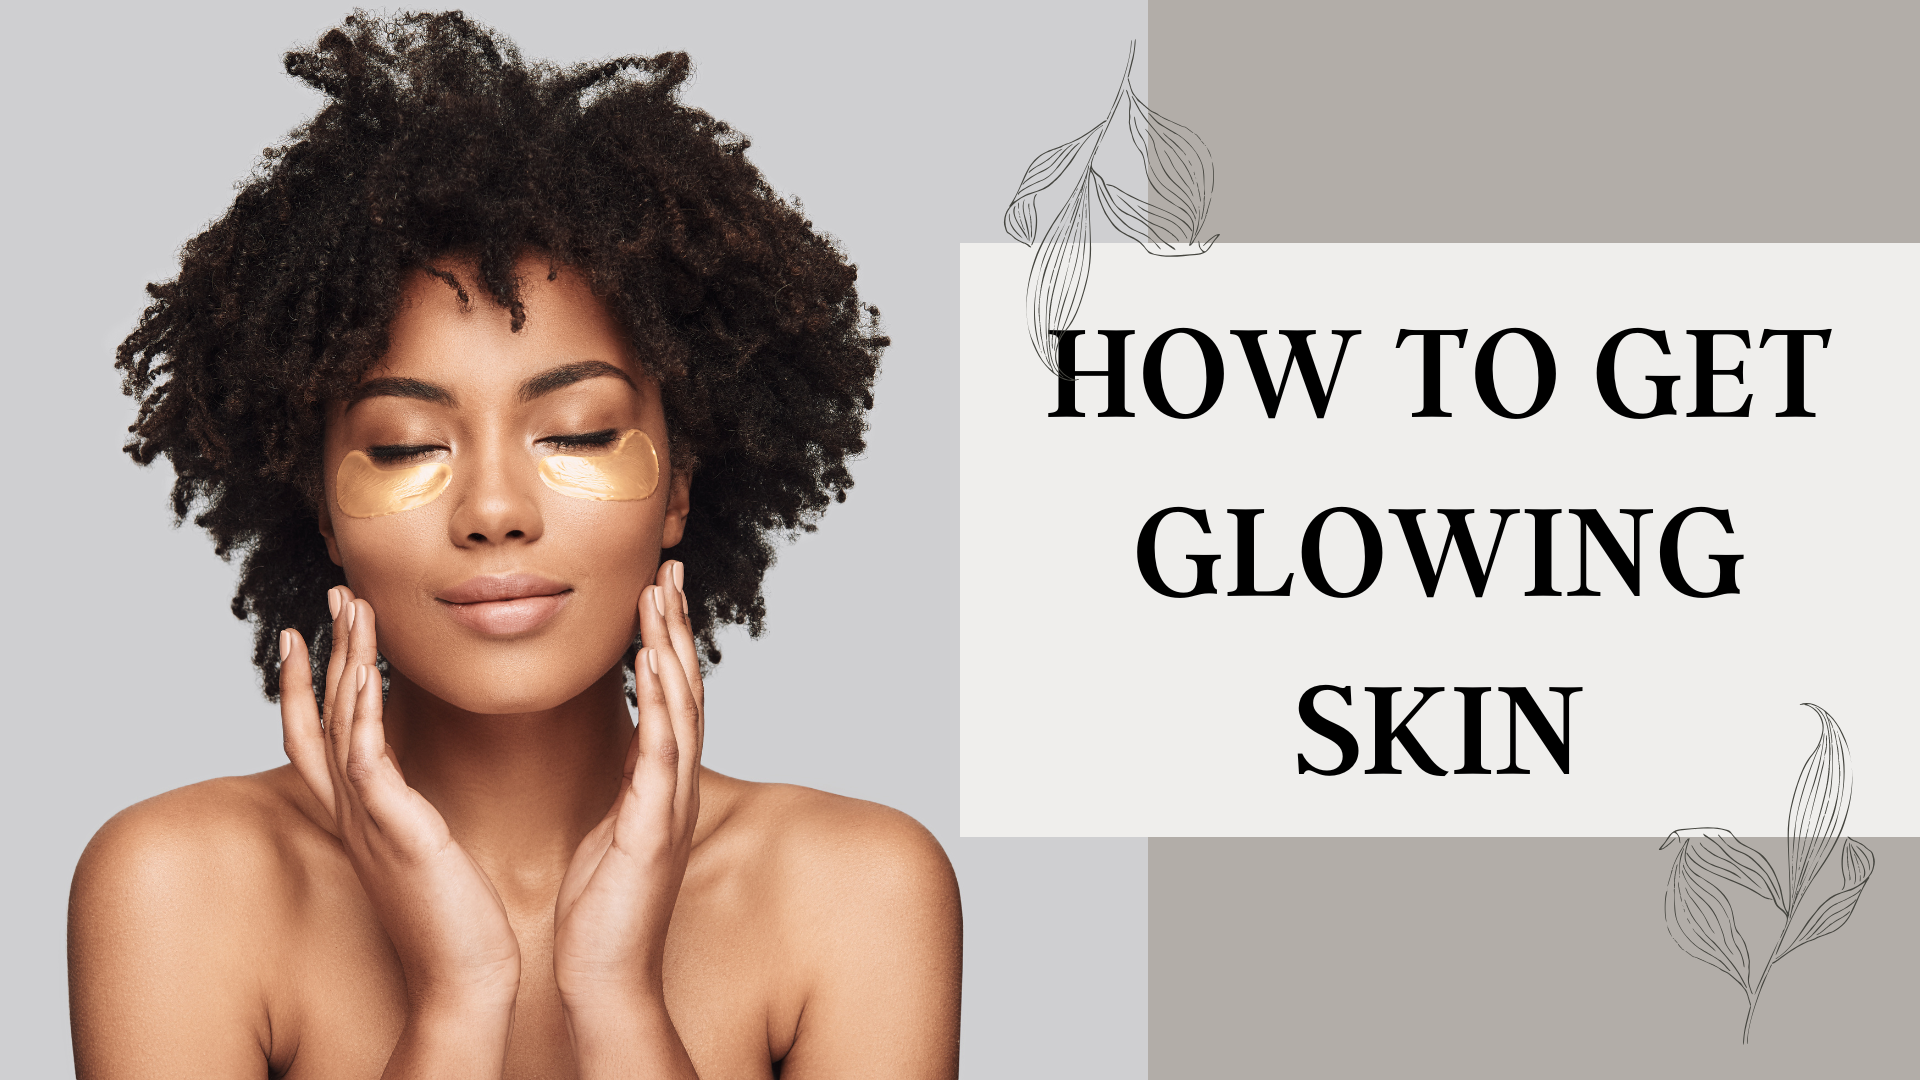 How to get glowing skin